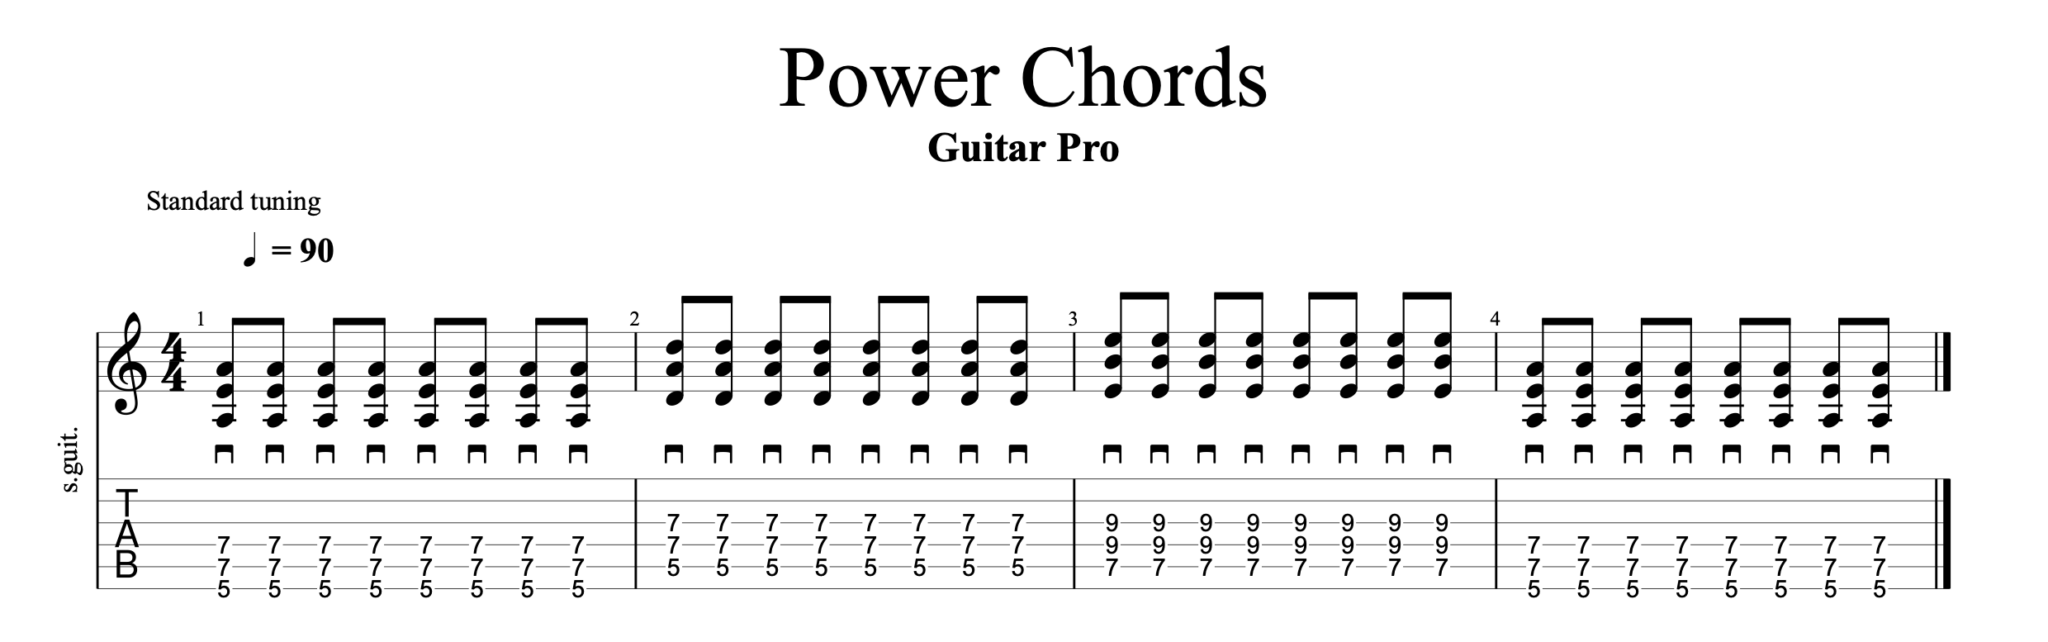 all power chords